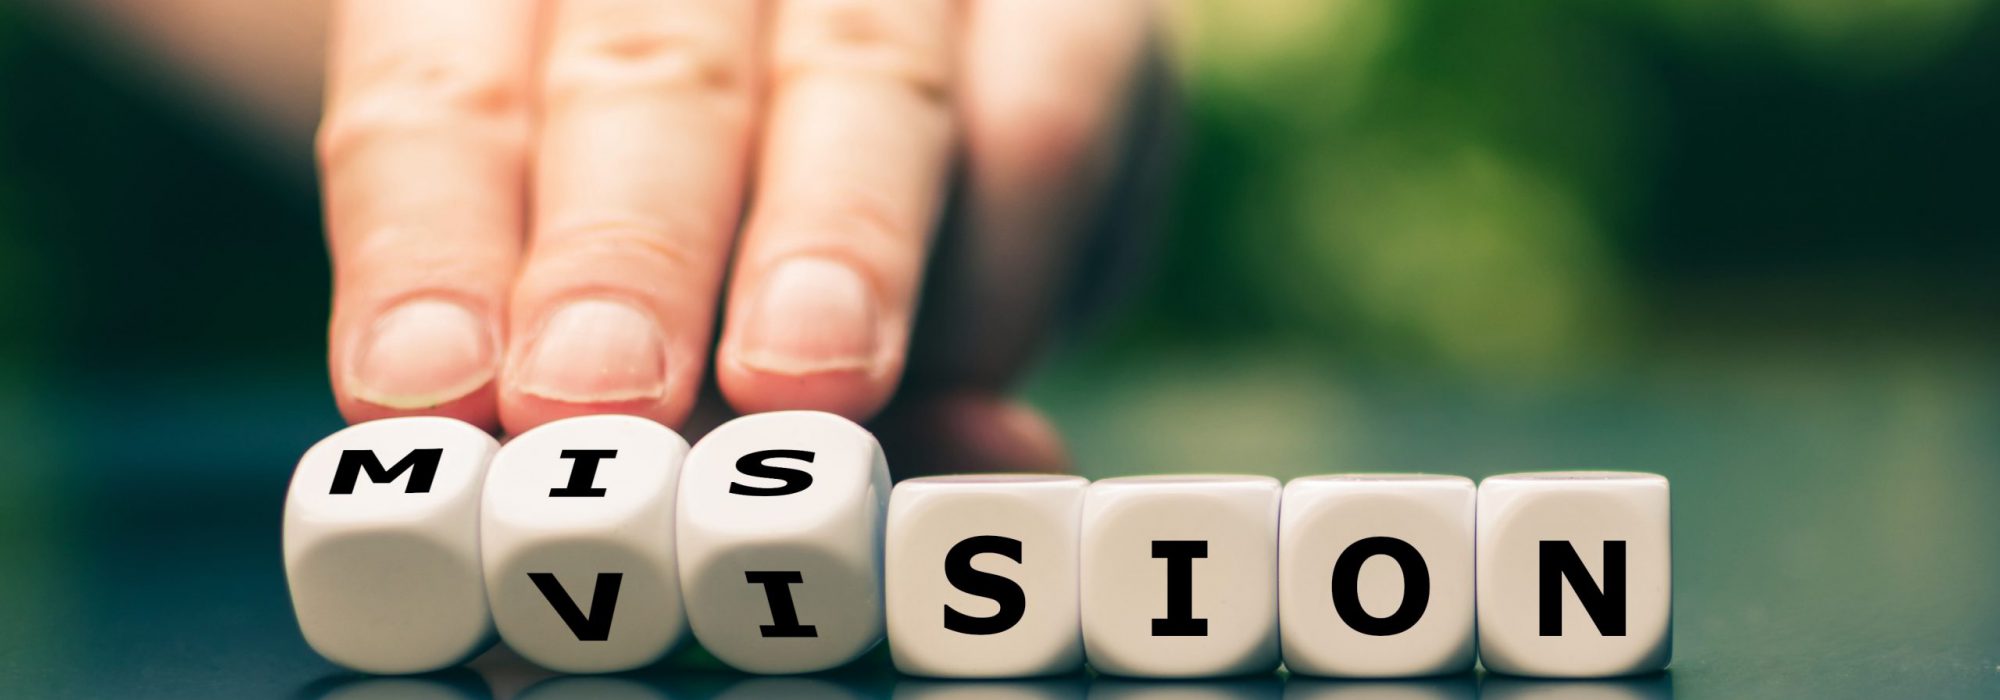 From a vision to a mission. Hand turns dice and changes the word vision to mission.